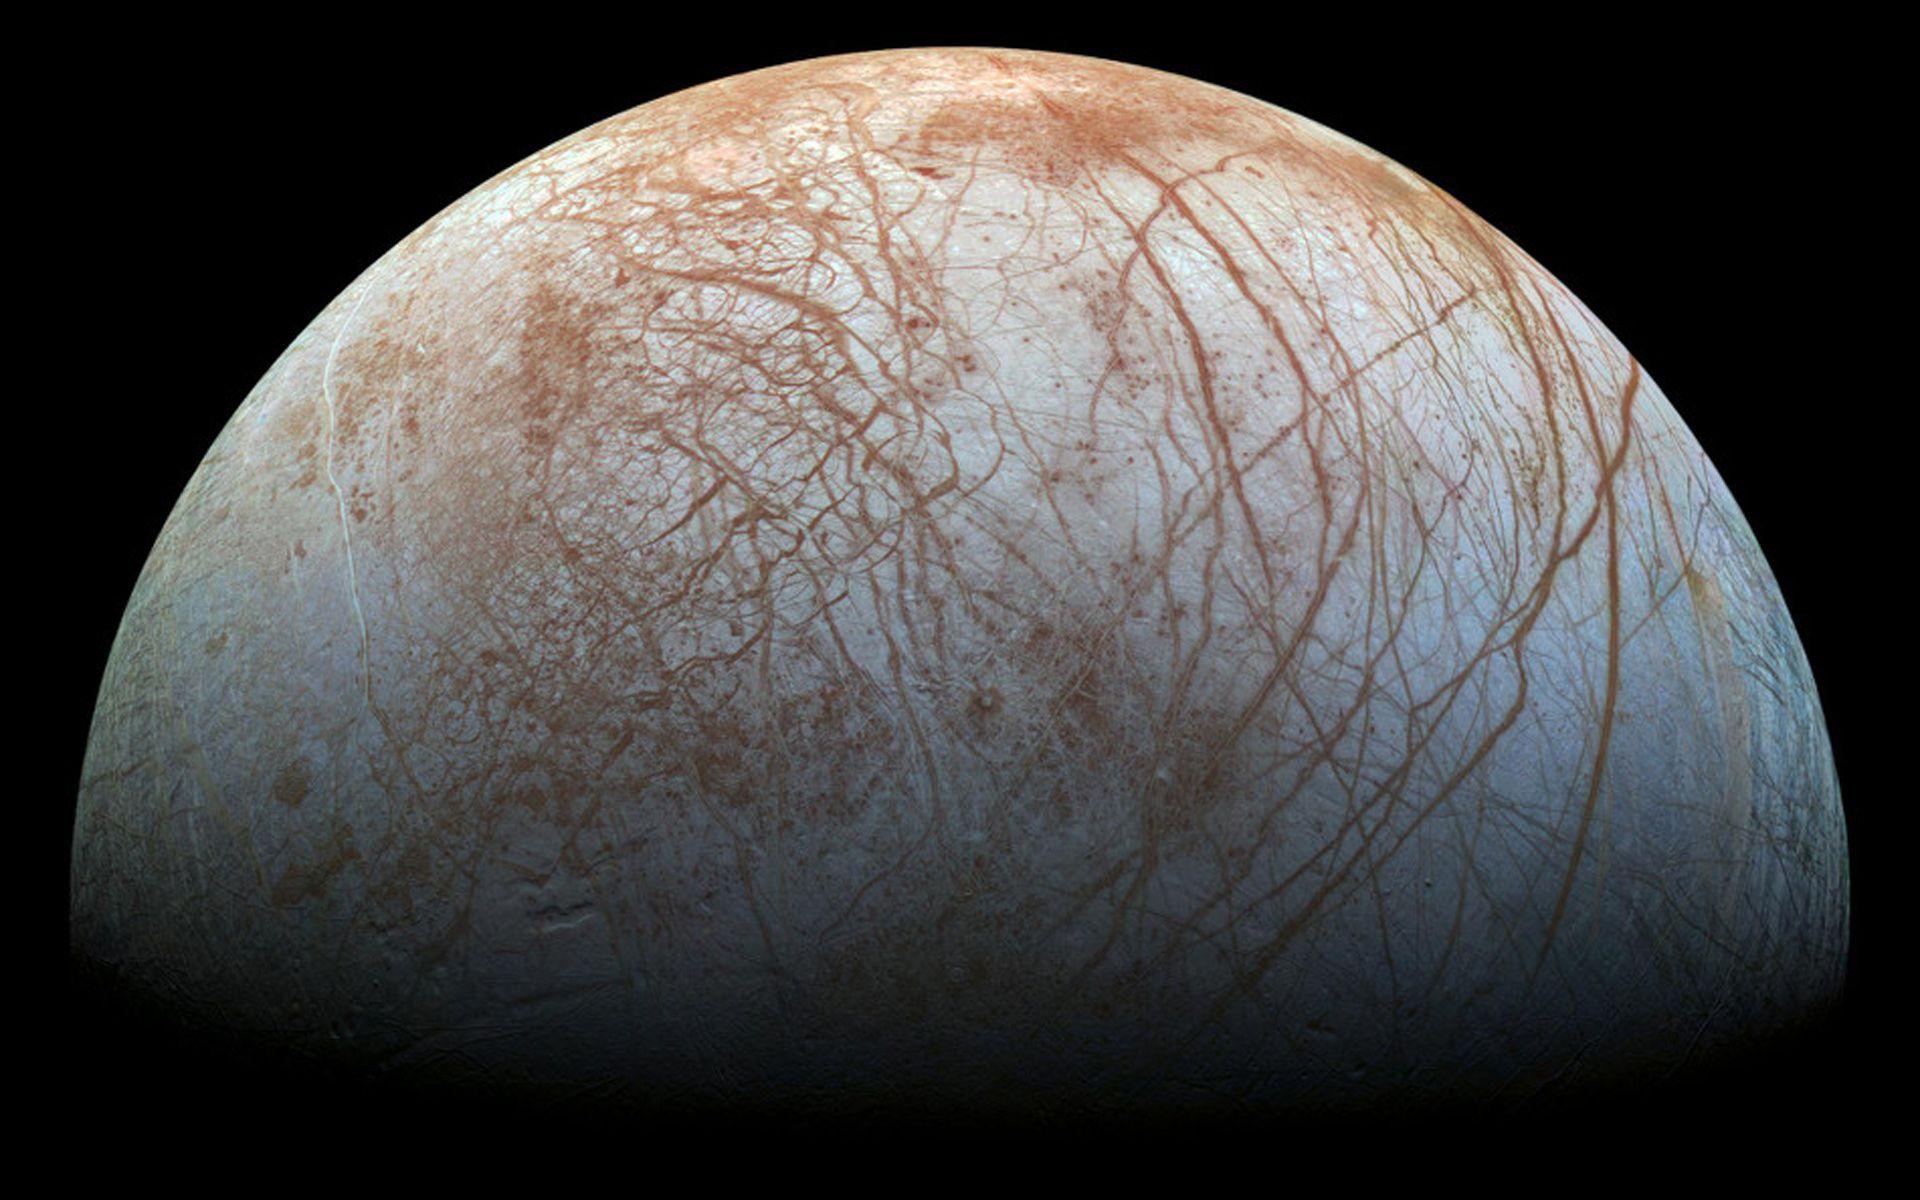 Study Provides Additional Evidence for Water Vapor Plumes on Europa